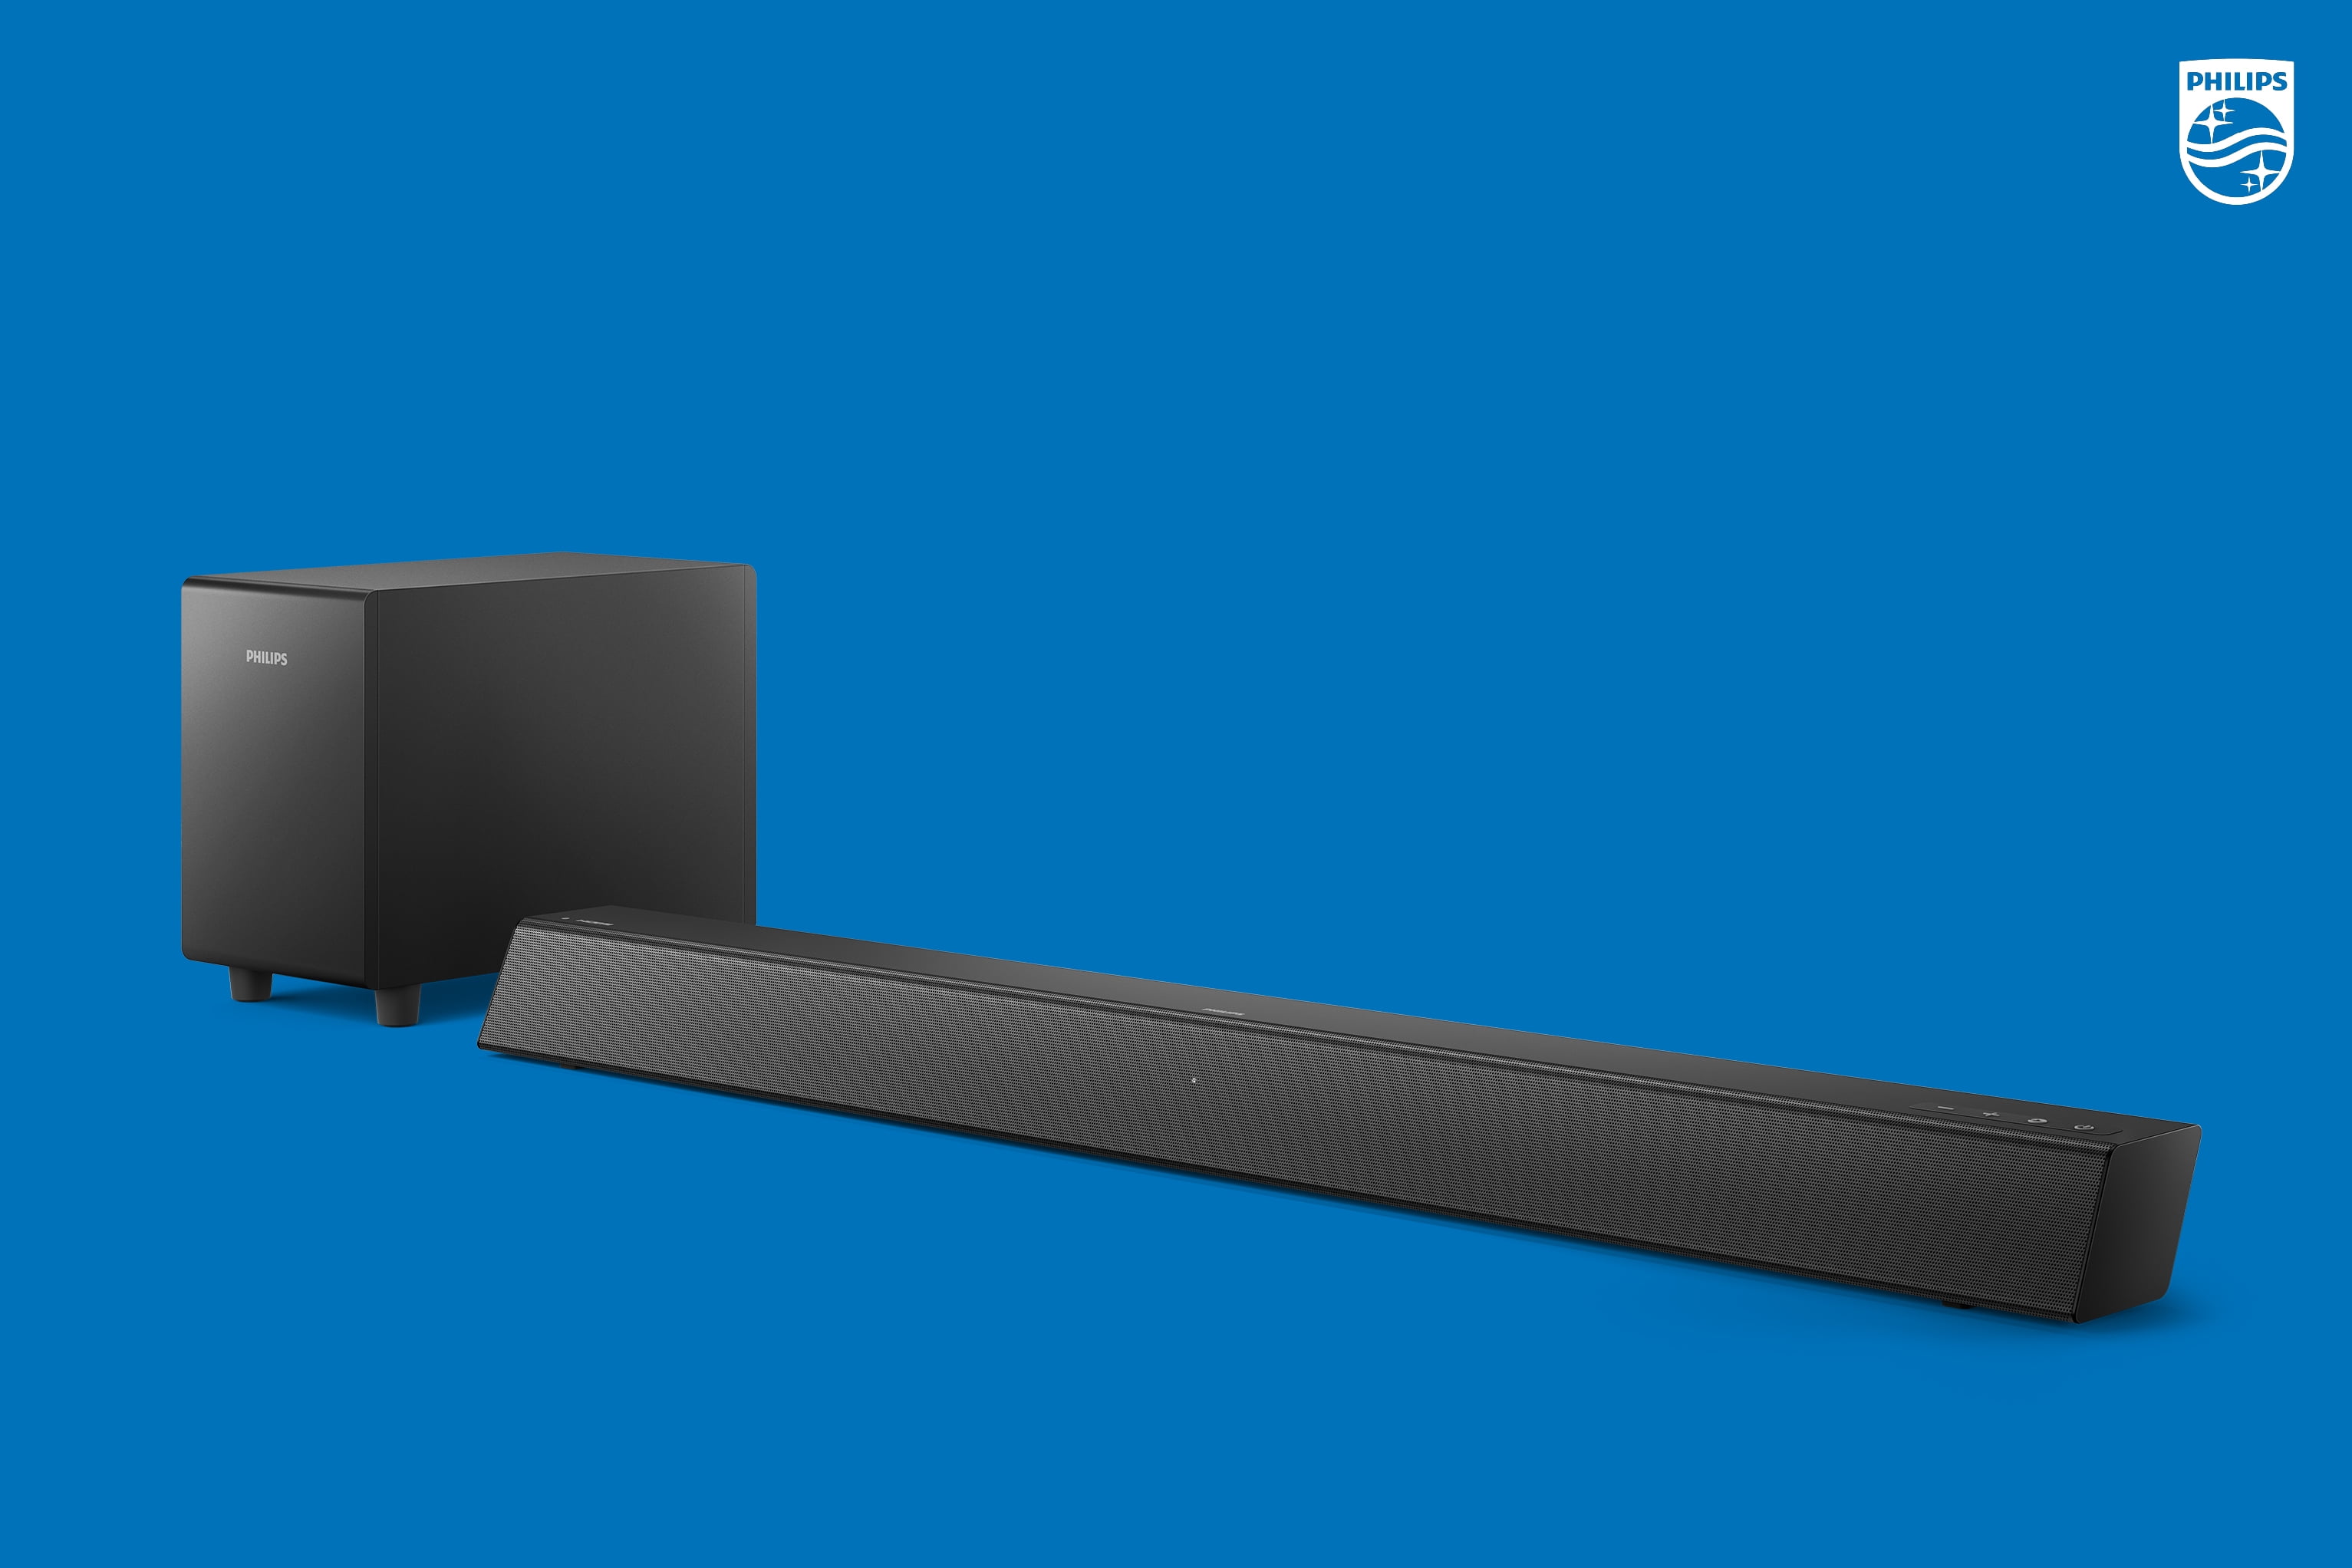 Philips B5306 Soundbar with Wireless Subwoofer and HDMI ARC Support - Walmart.com